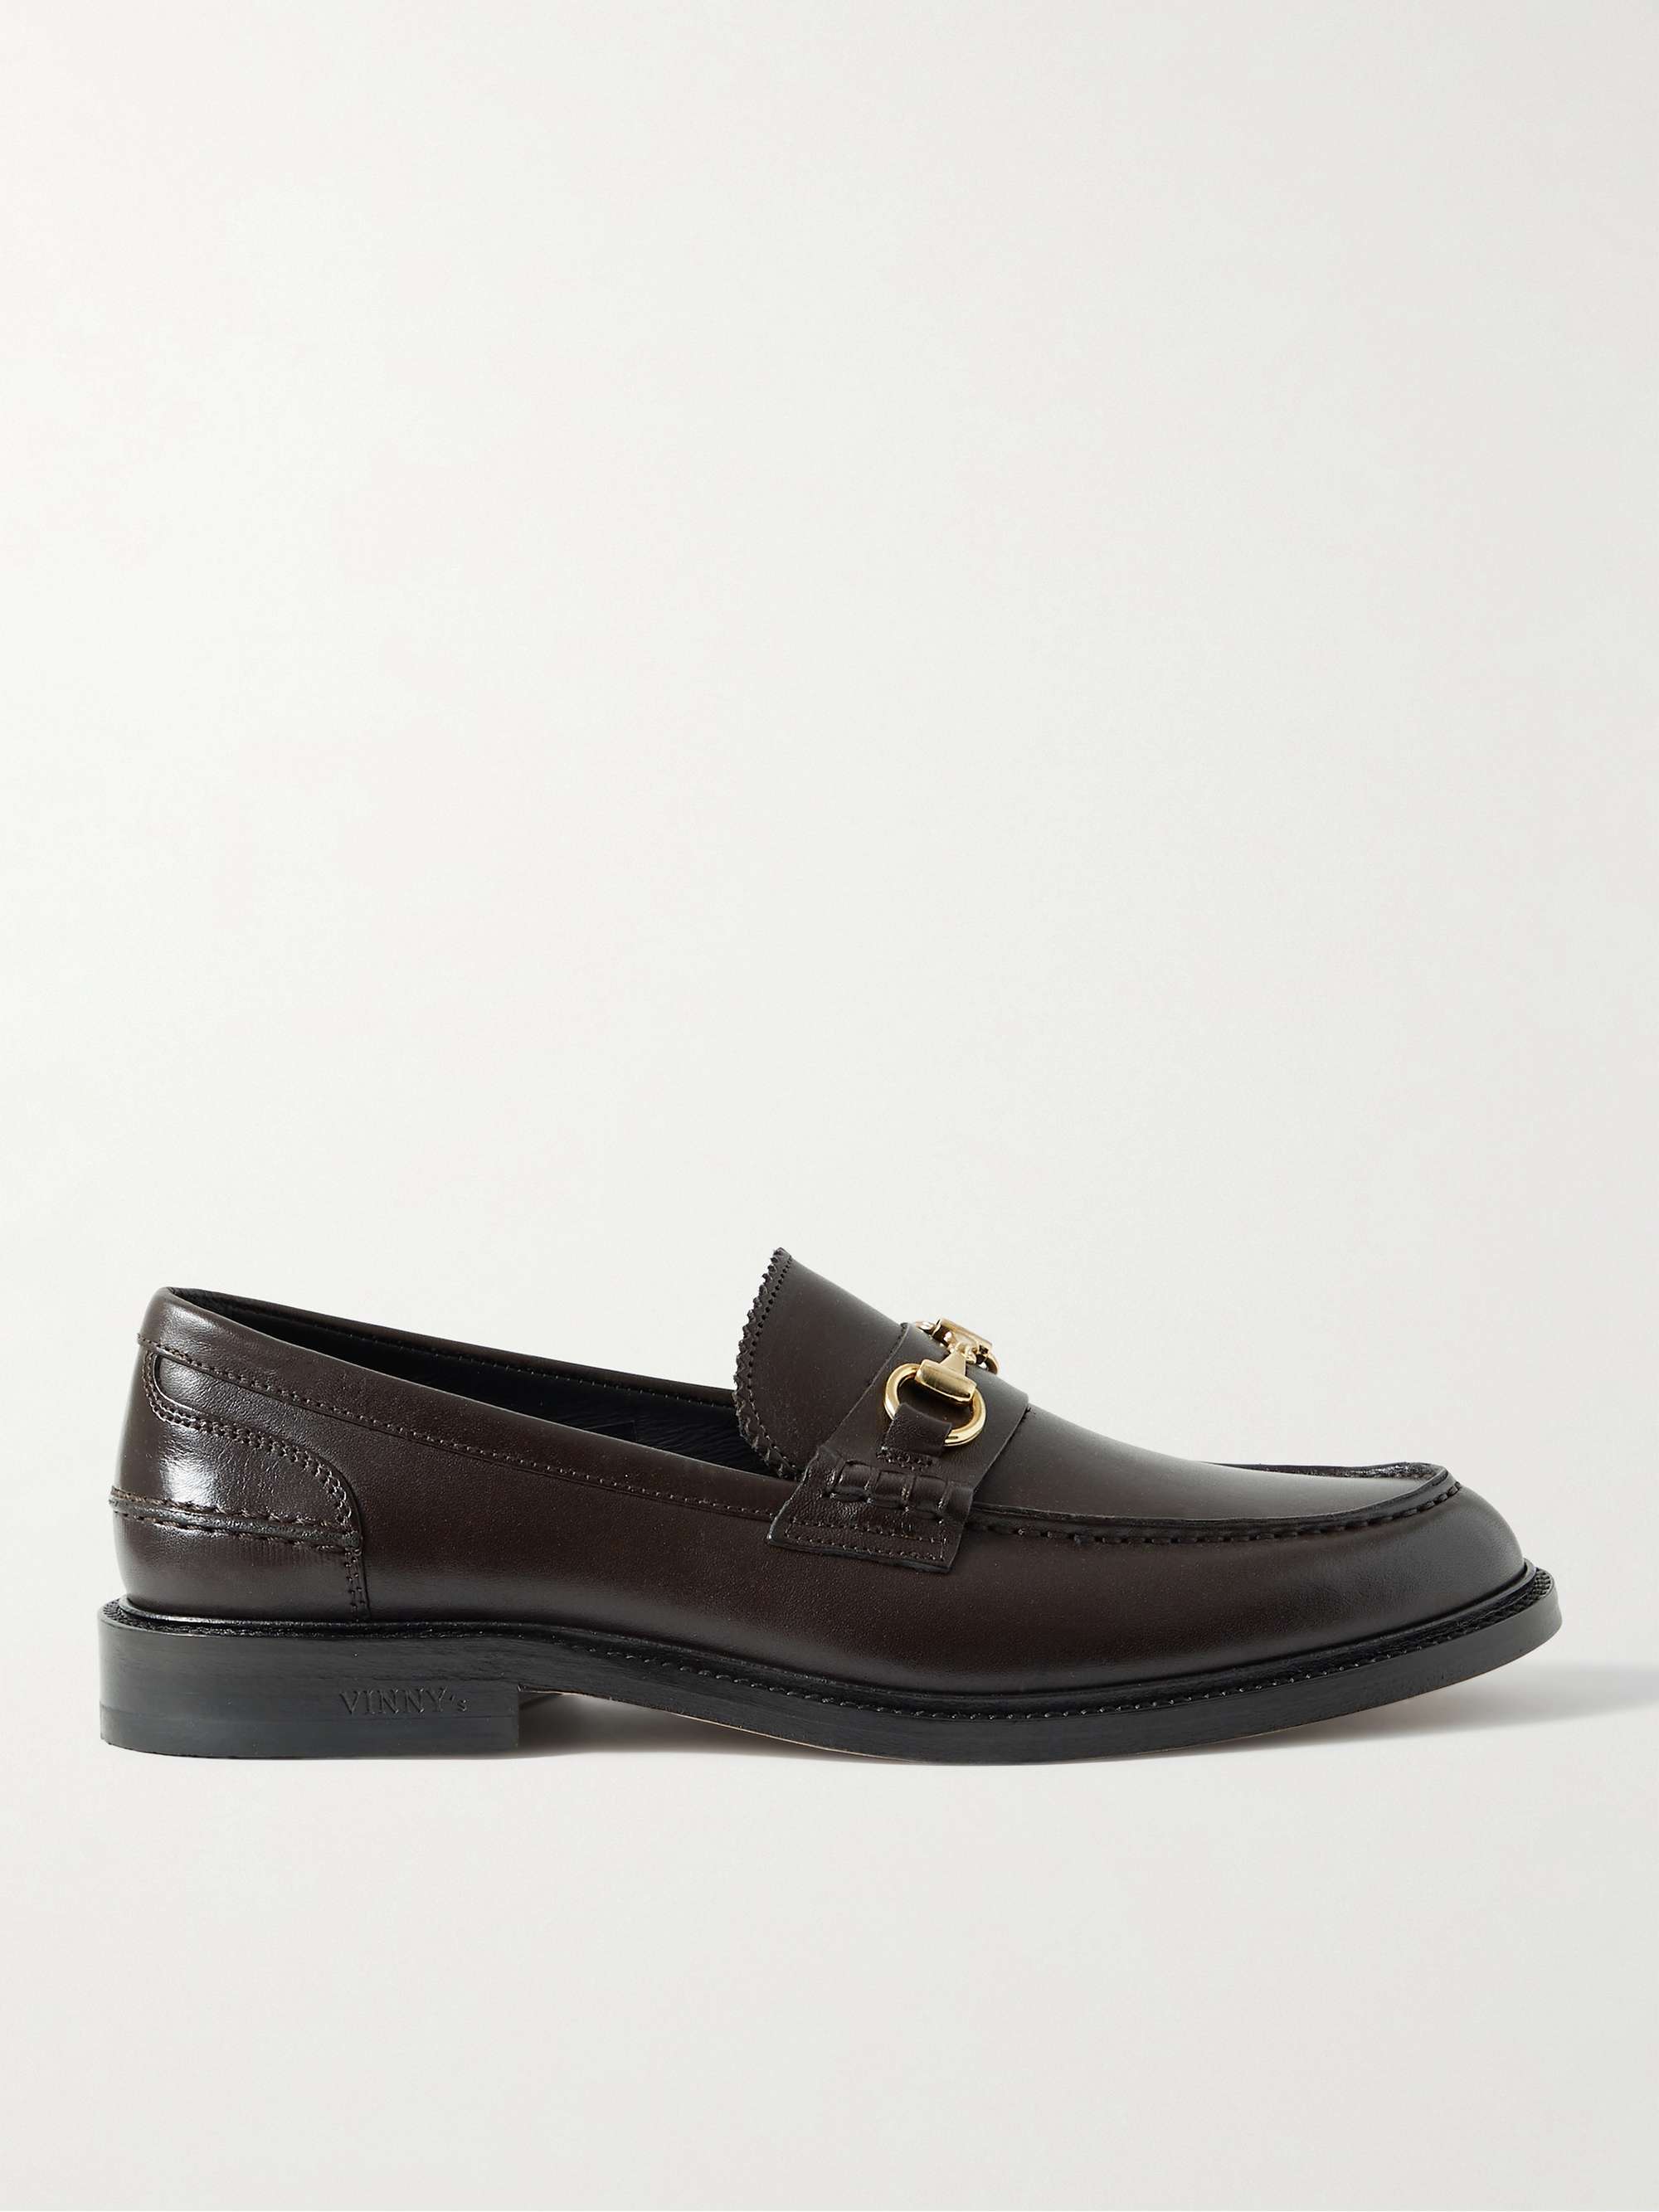 VINNY'S Townee Embellished Leather Penny Loafers